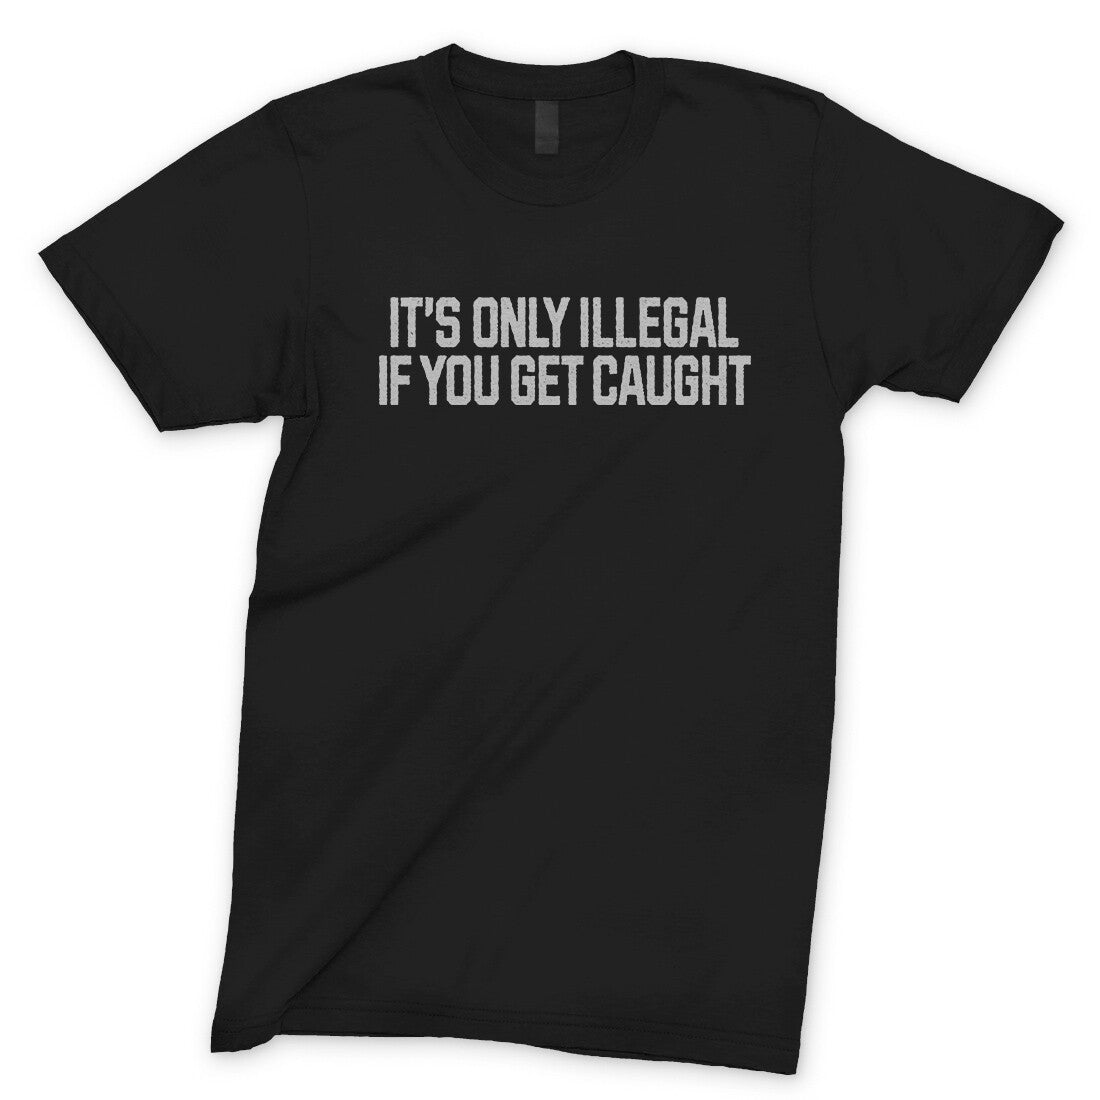 It’s Only Illegal If You Get Caught in Black Color